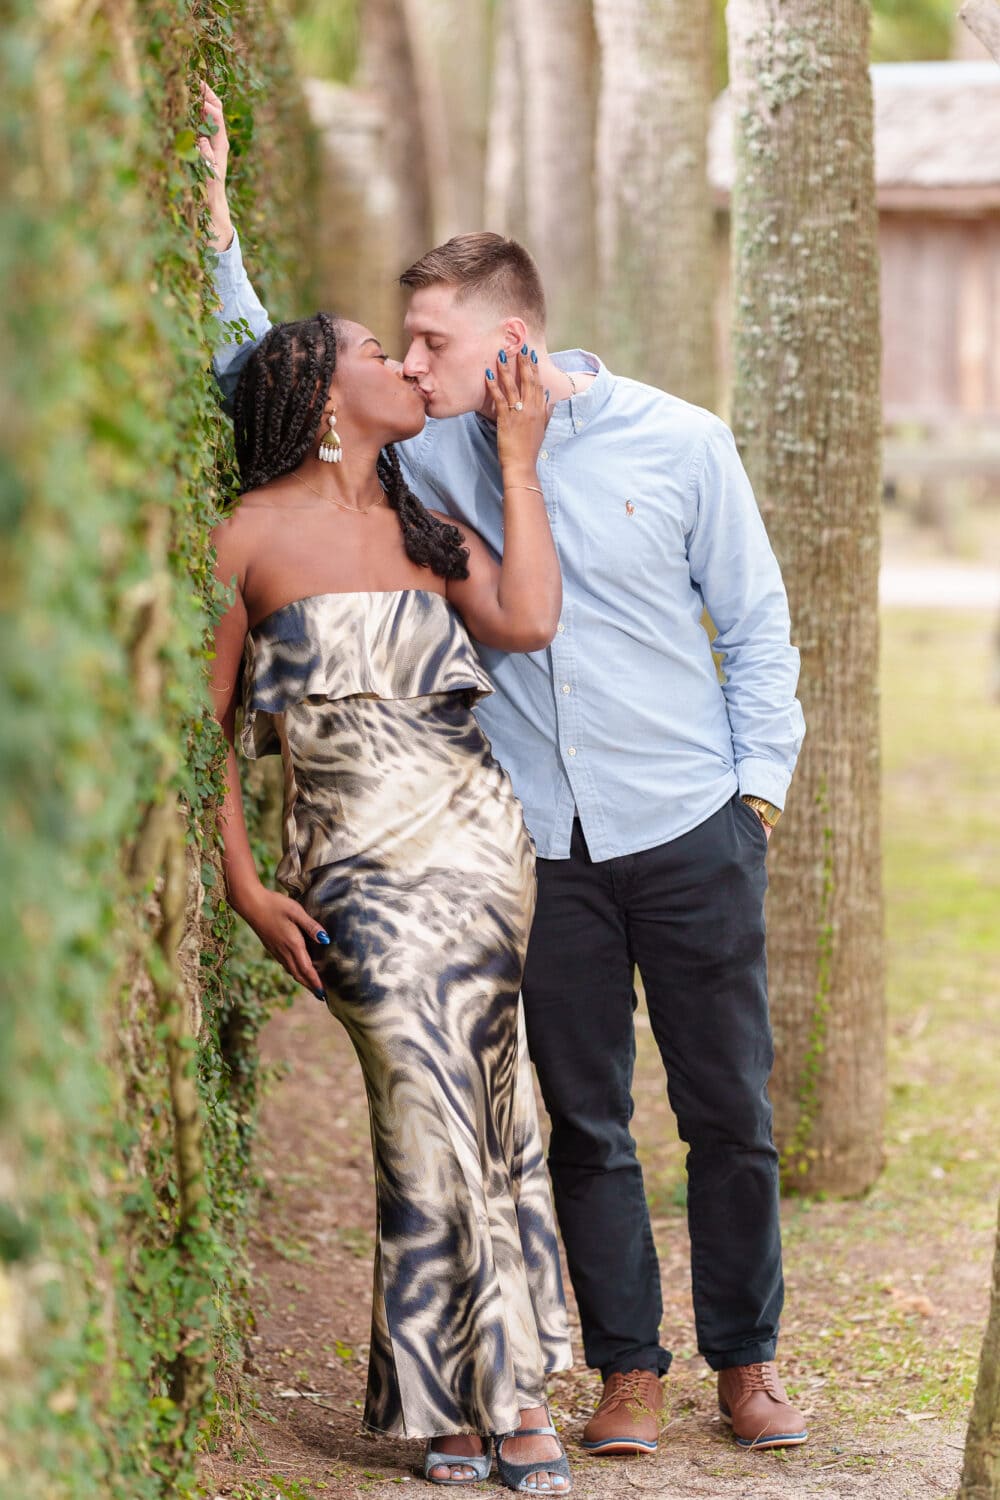 Romantic kiss by the ivy wall - Huntington Beach State Park